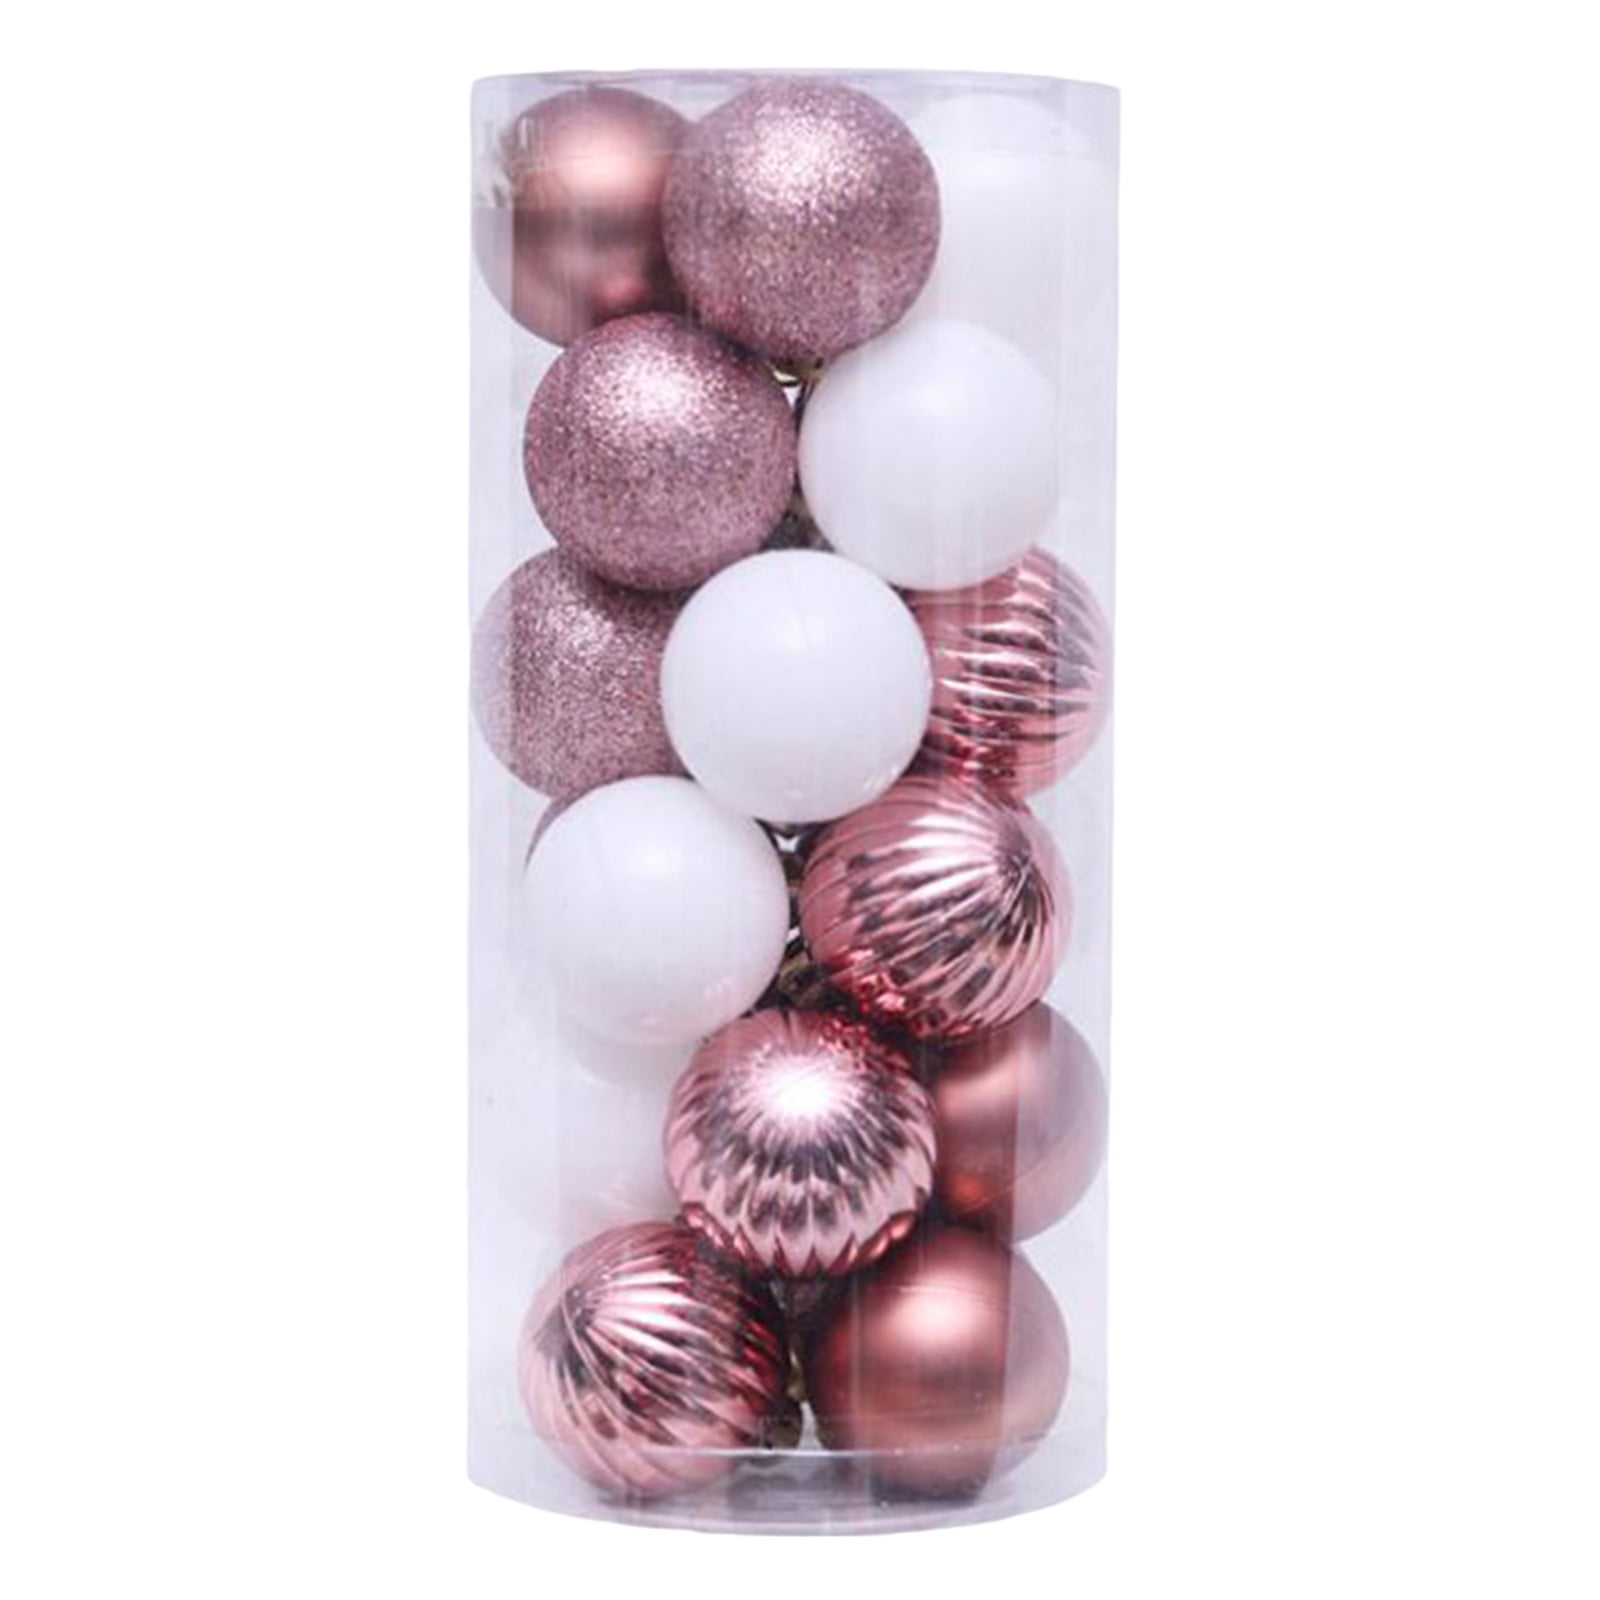 Details about   24PCS Christmas  Tree Balls Baubles Glitter Hanging Party Ornaments Home Decor 